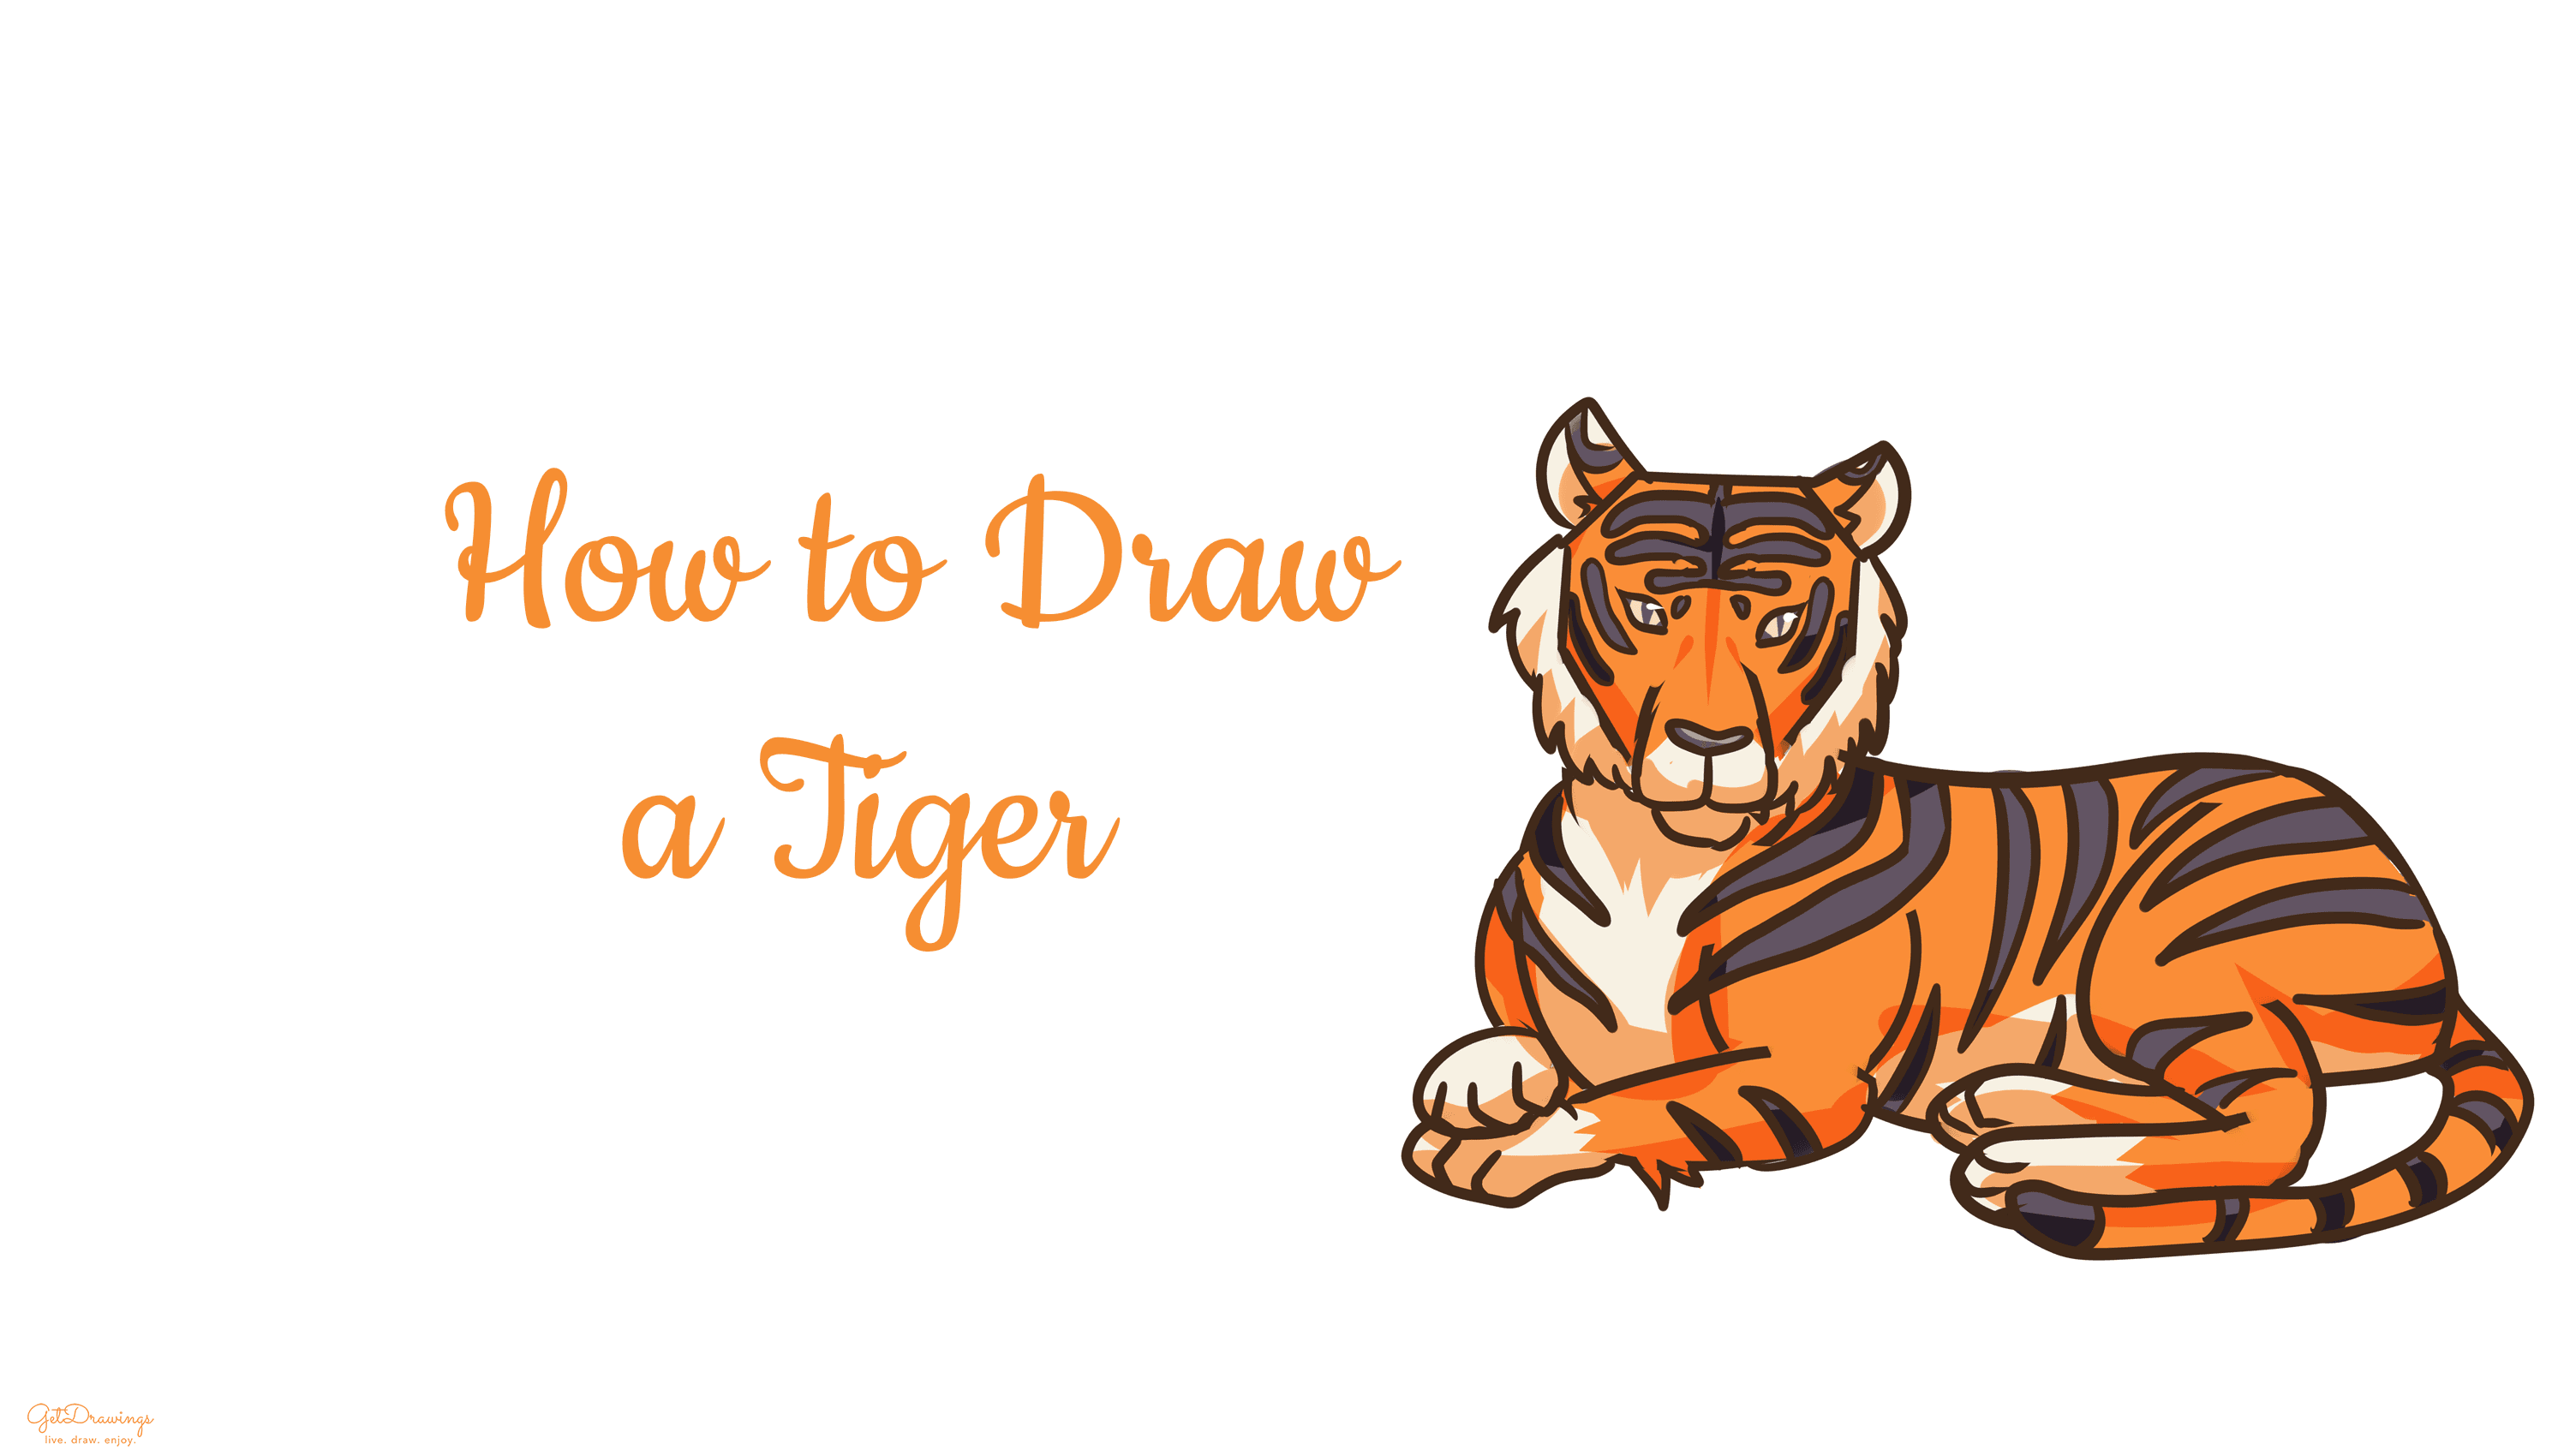 How to draw a Tiger